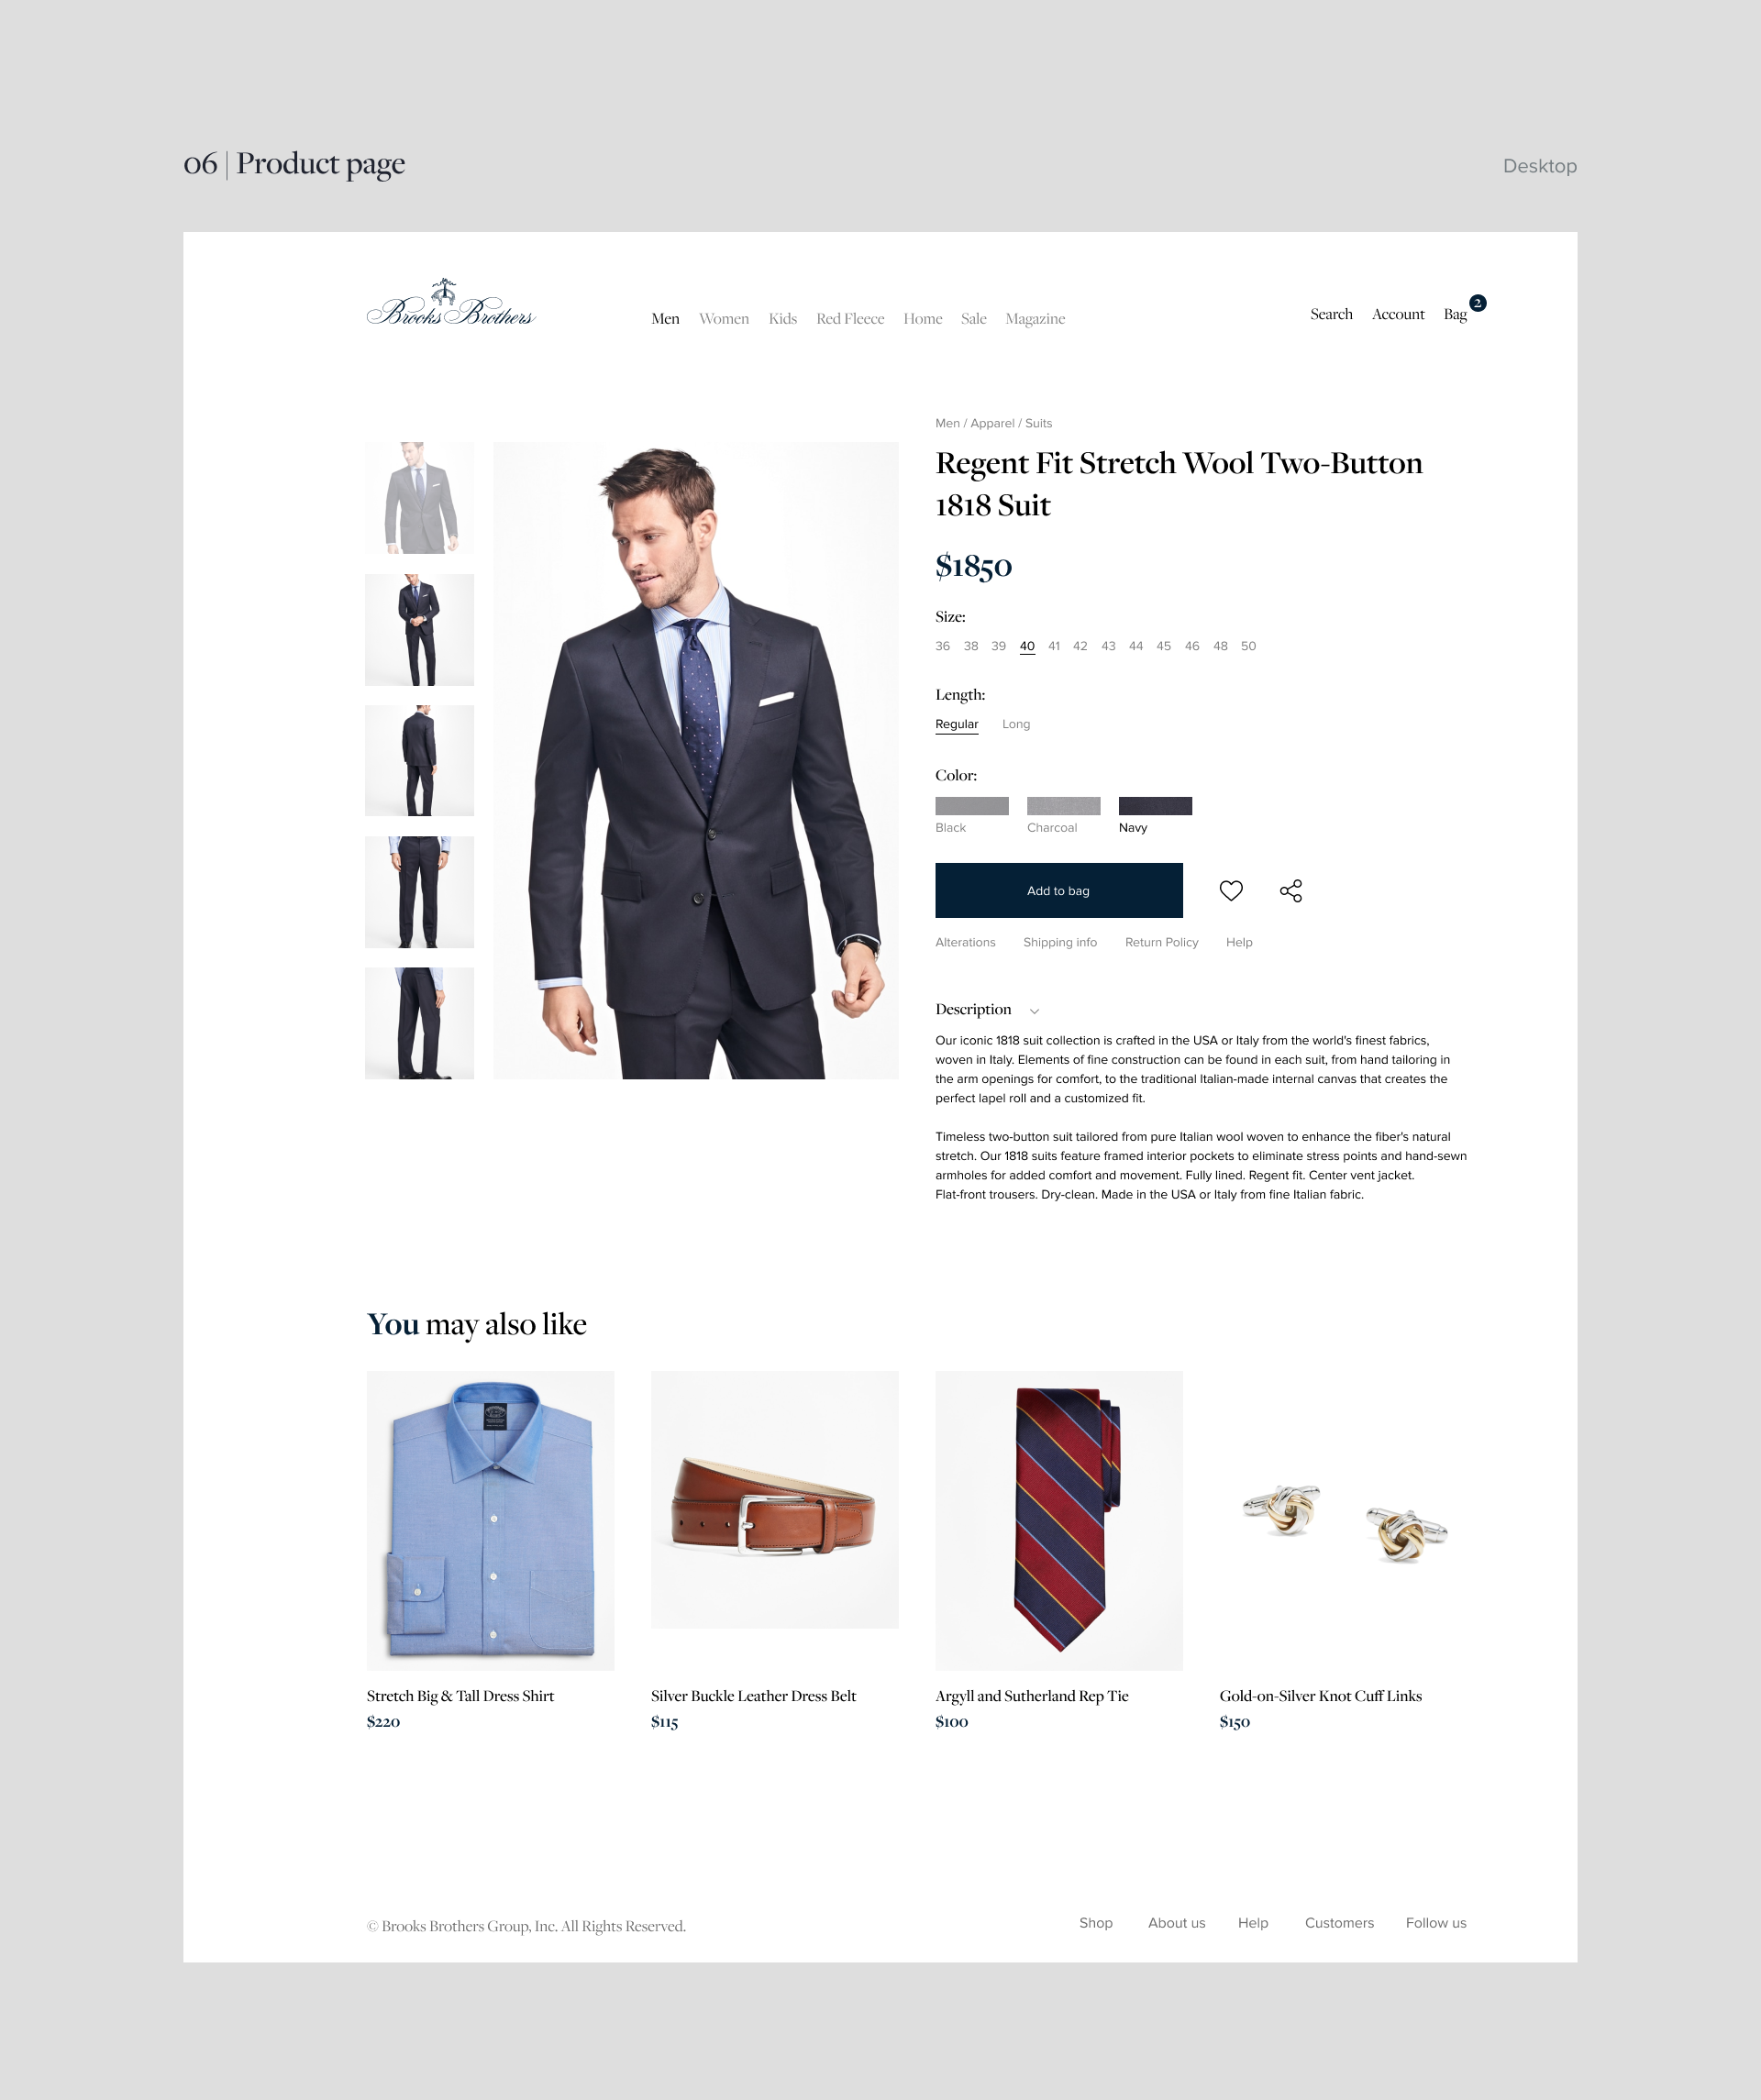 brooks brothers online bill pay